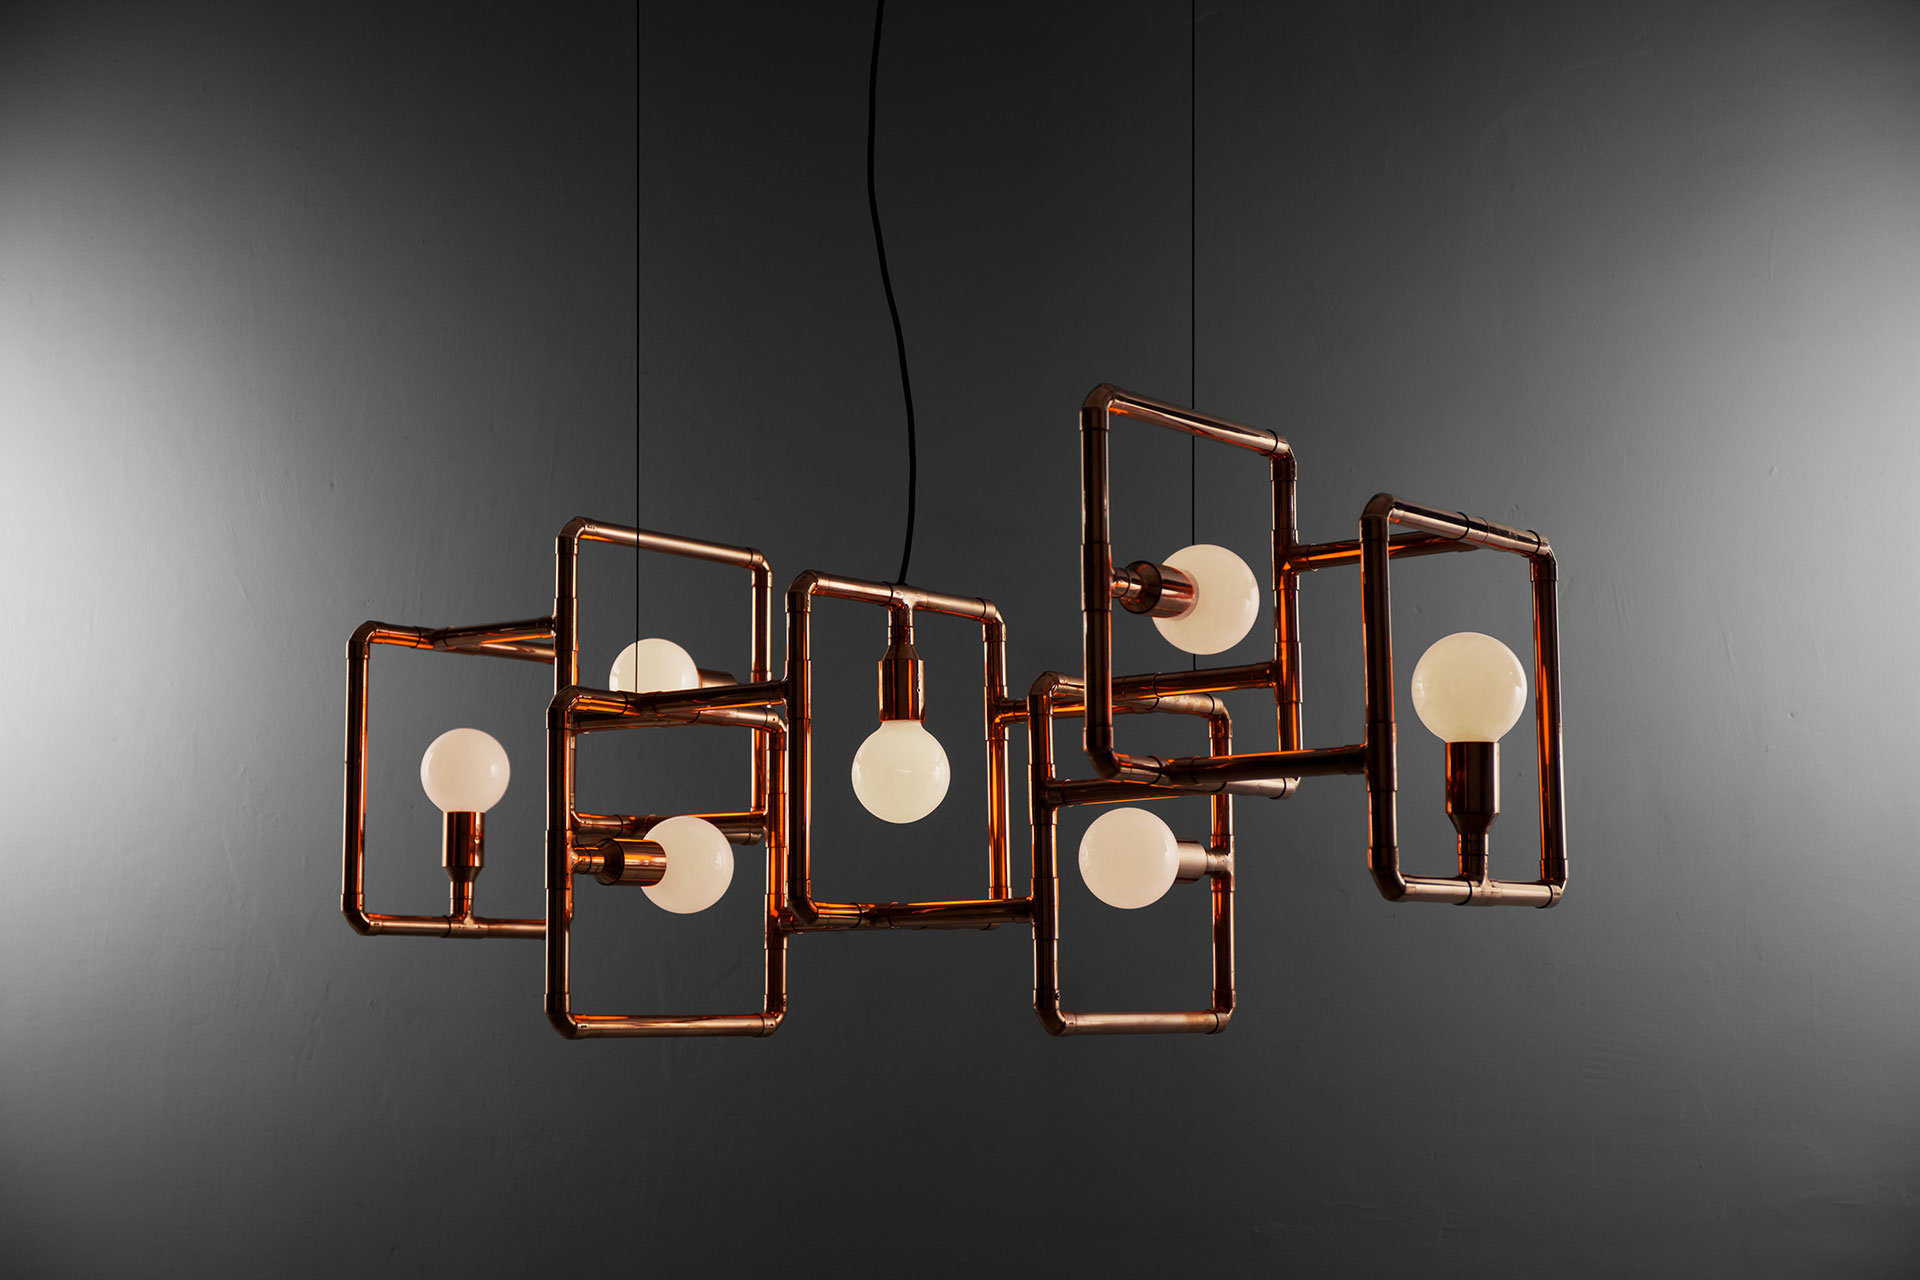 Conceptual design ceiling lamp made of copper tubing in industrial style interior